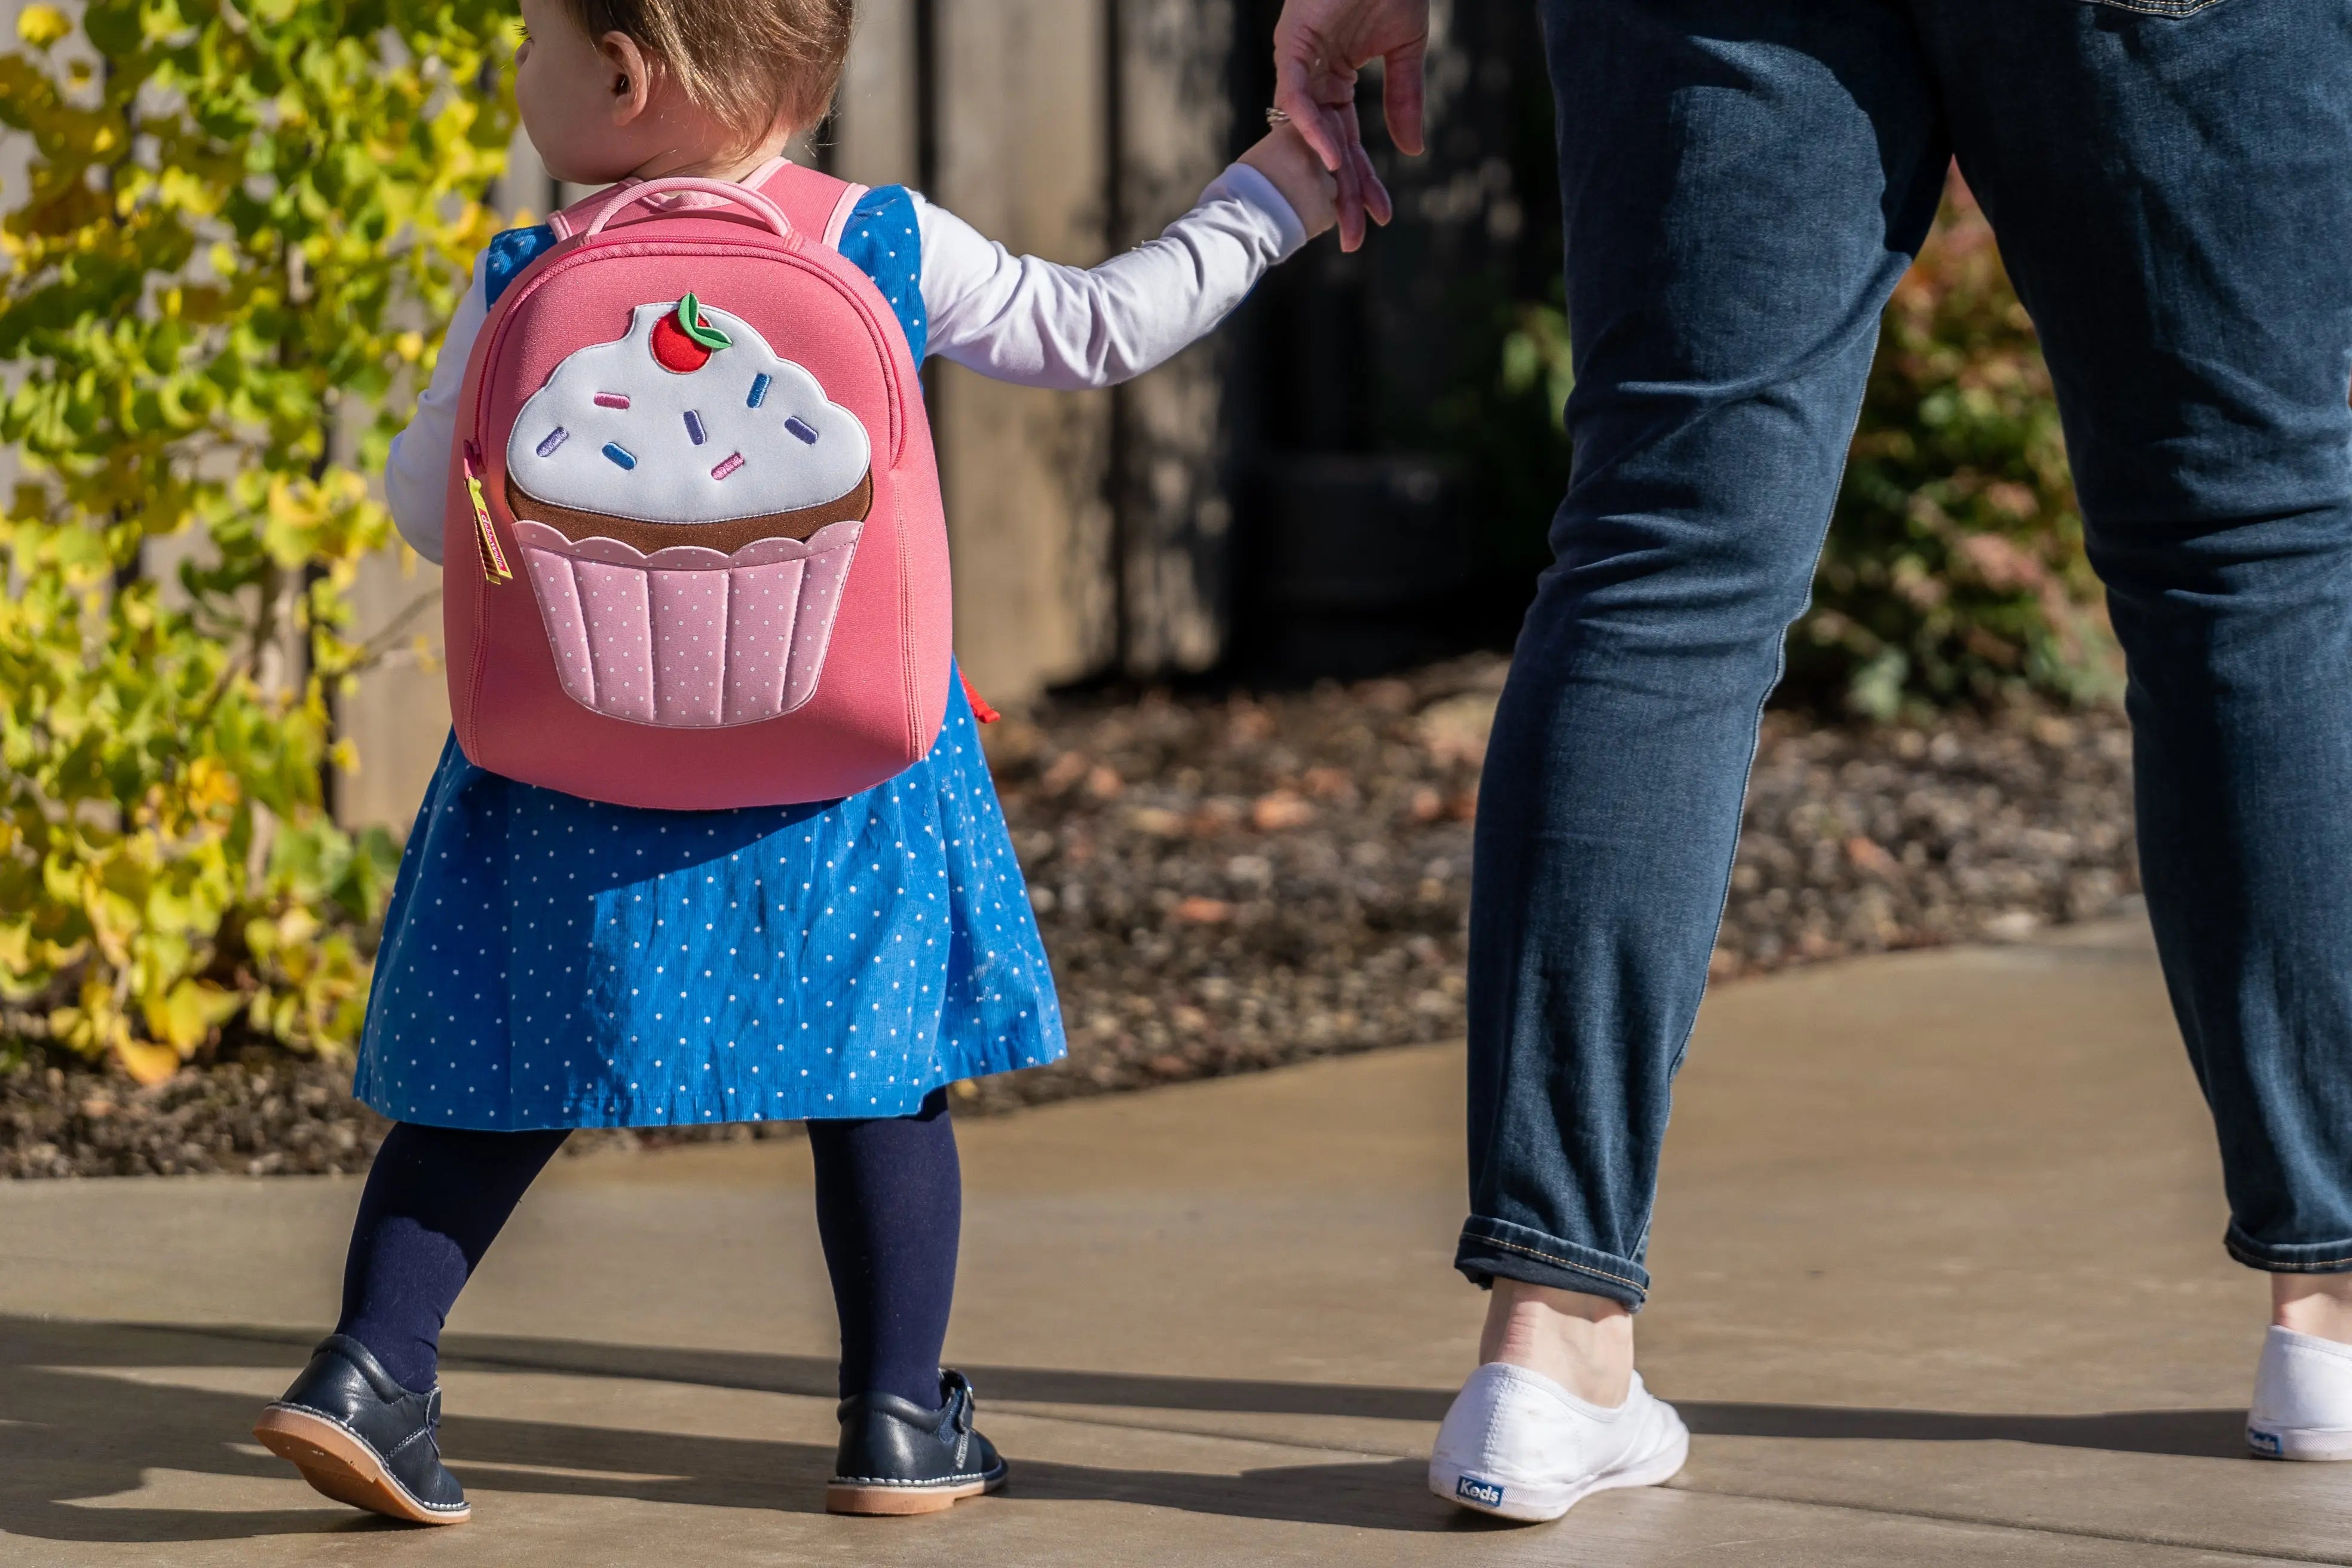 Cupcake Harness Toddler Backpack - Pink, Safety Harness, Kids Backpack Toddler Harness BP Dabbawalla   